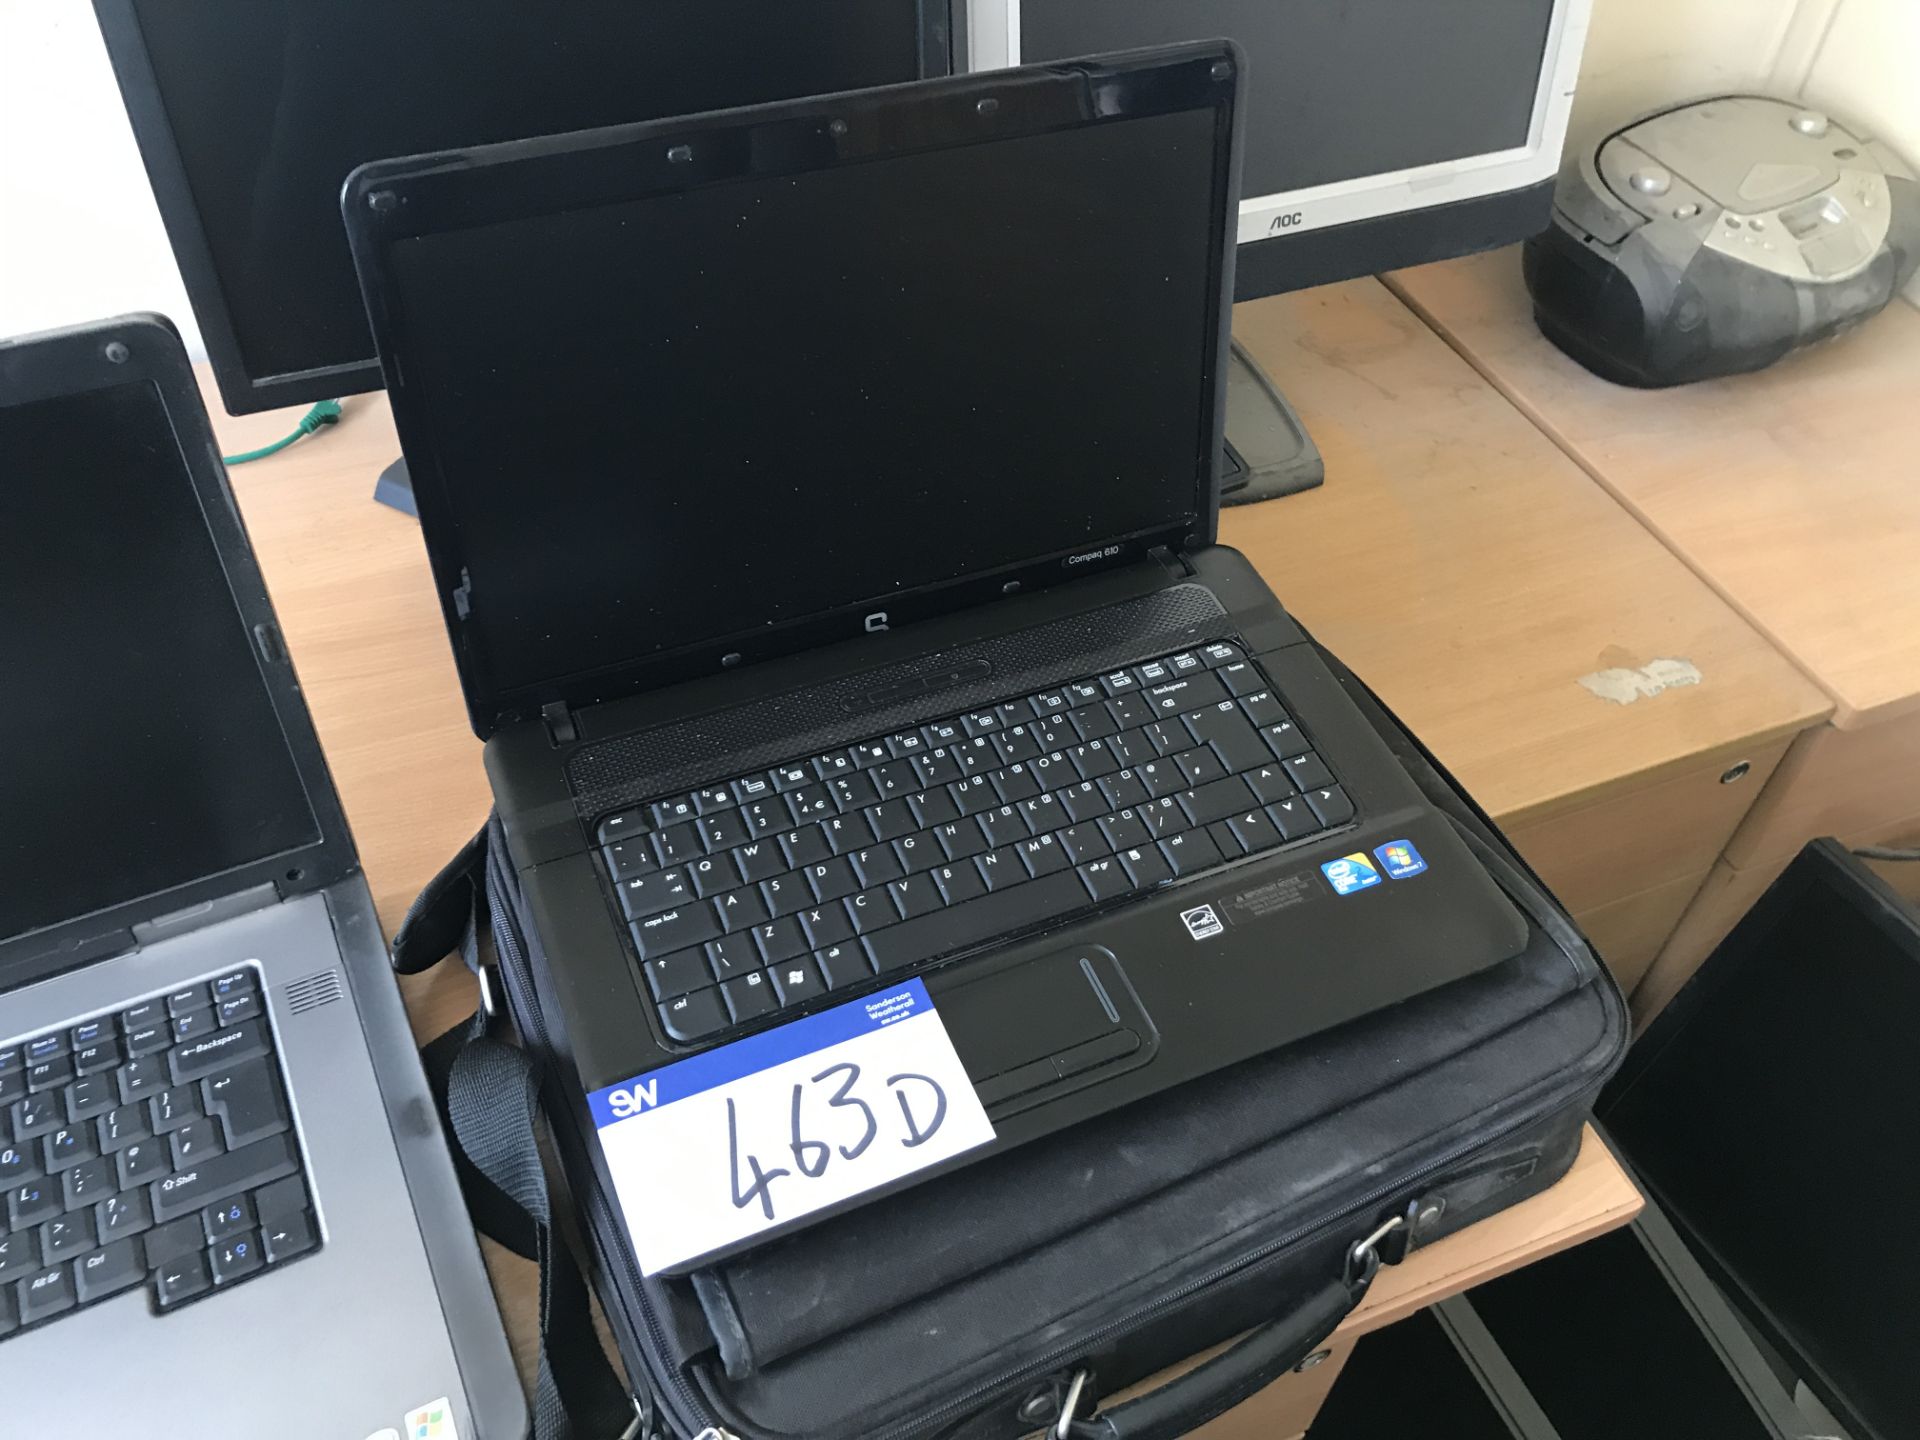 Compaq 610 Intel Core Duo Laptop (hard disk removed), with carry case (lot located at Bedfords